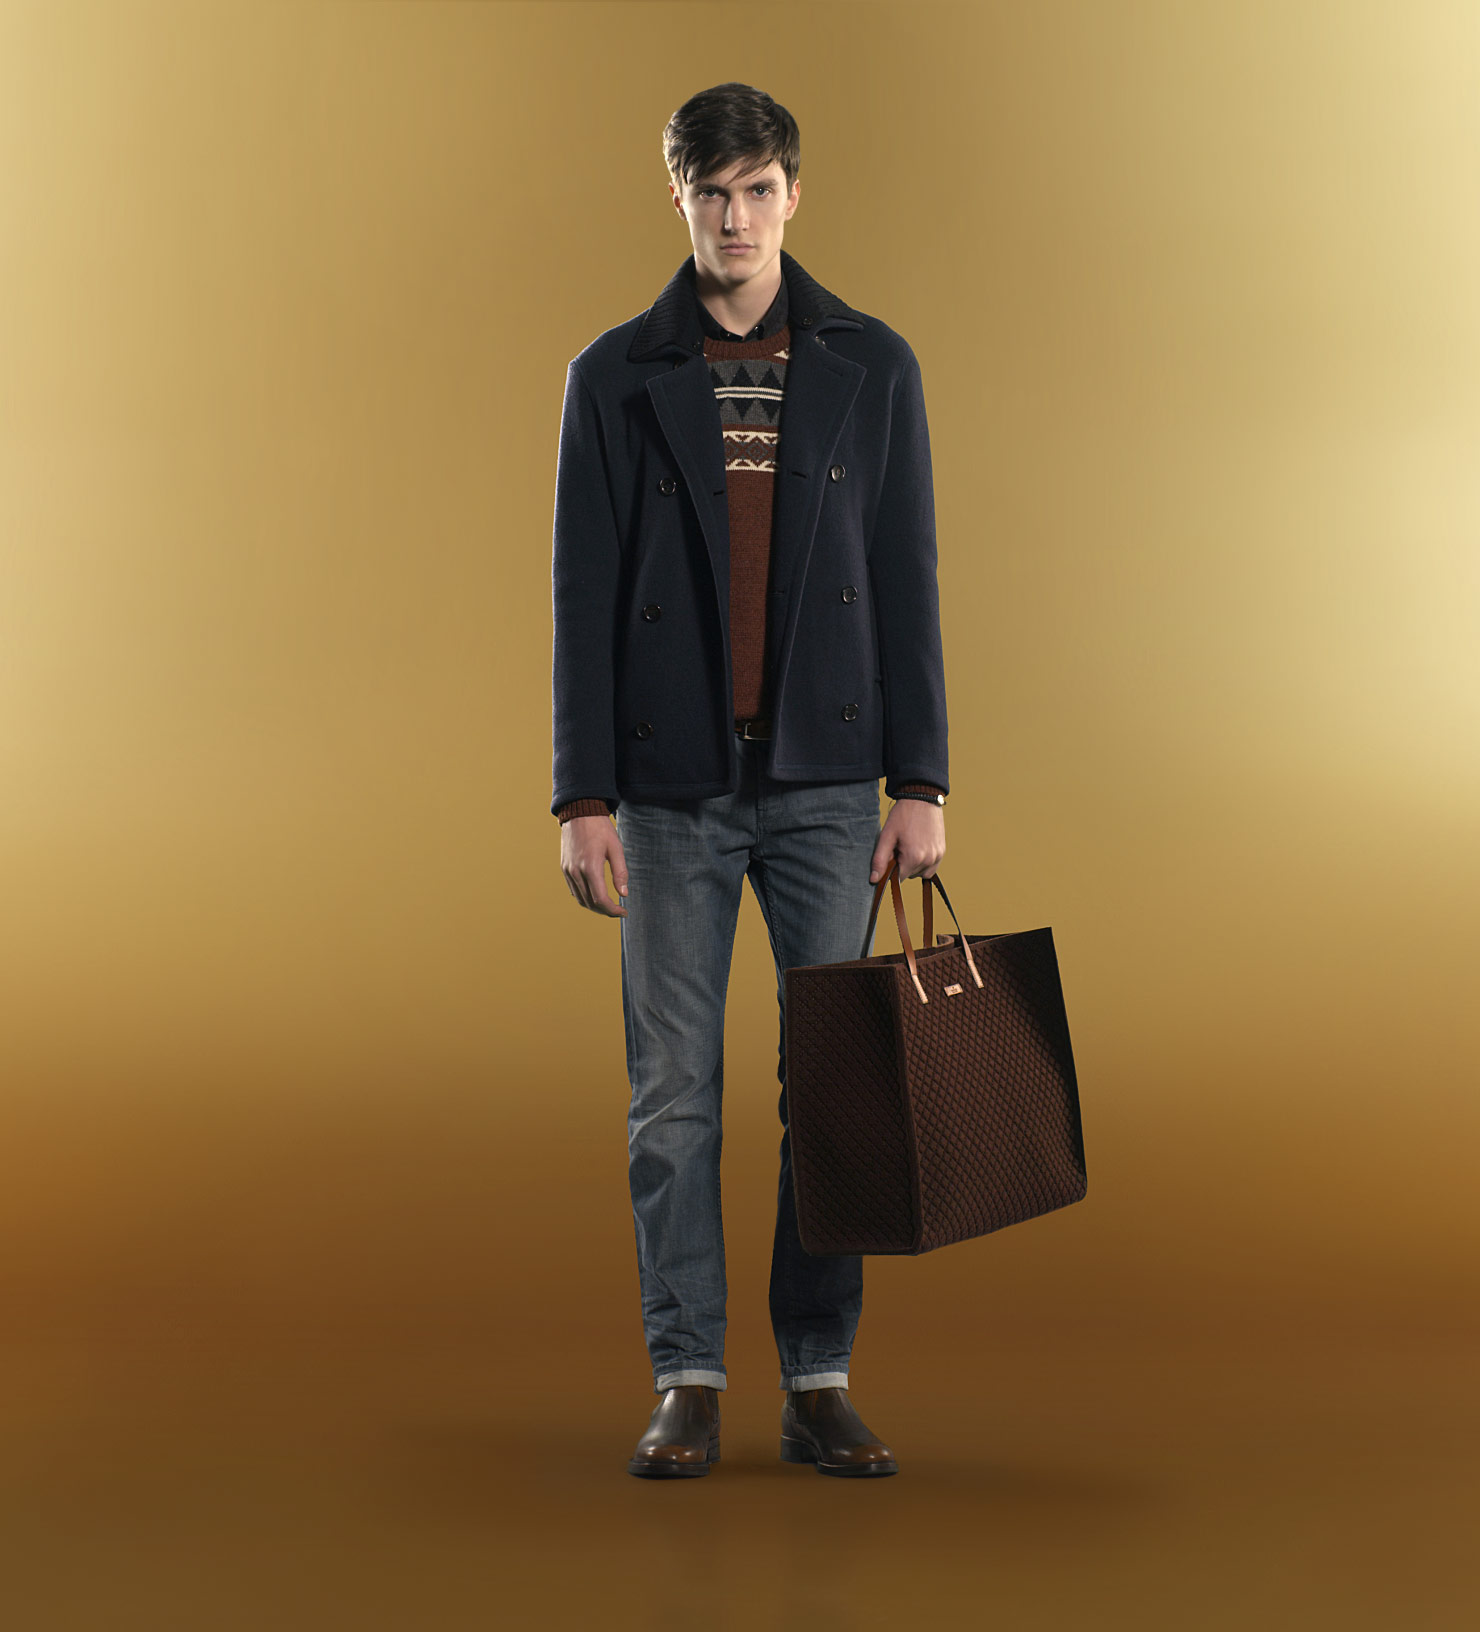 Gucci fall winter 2012/2013 collection for men